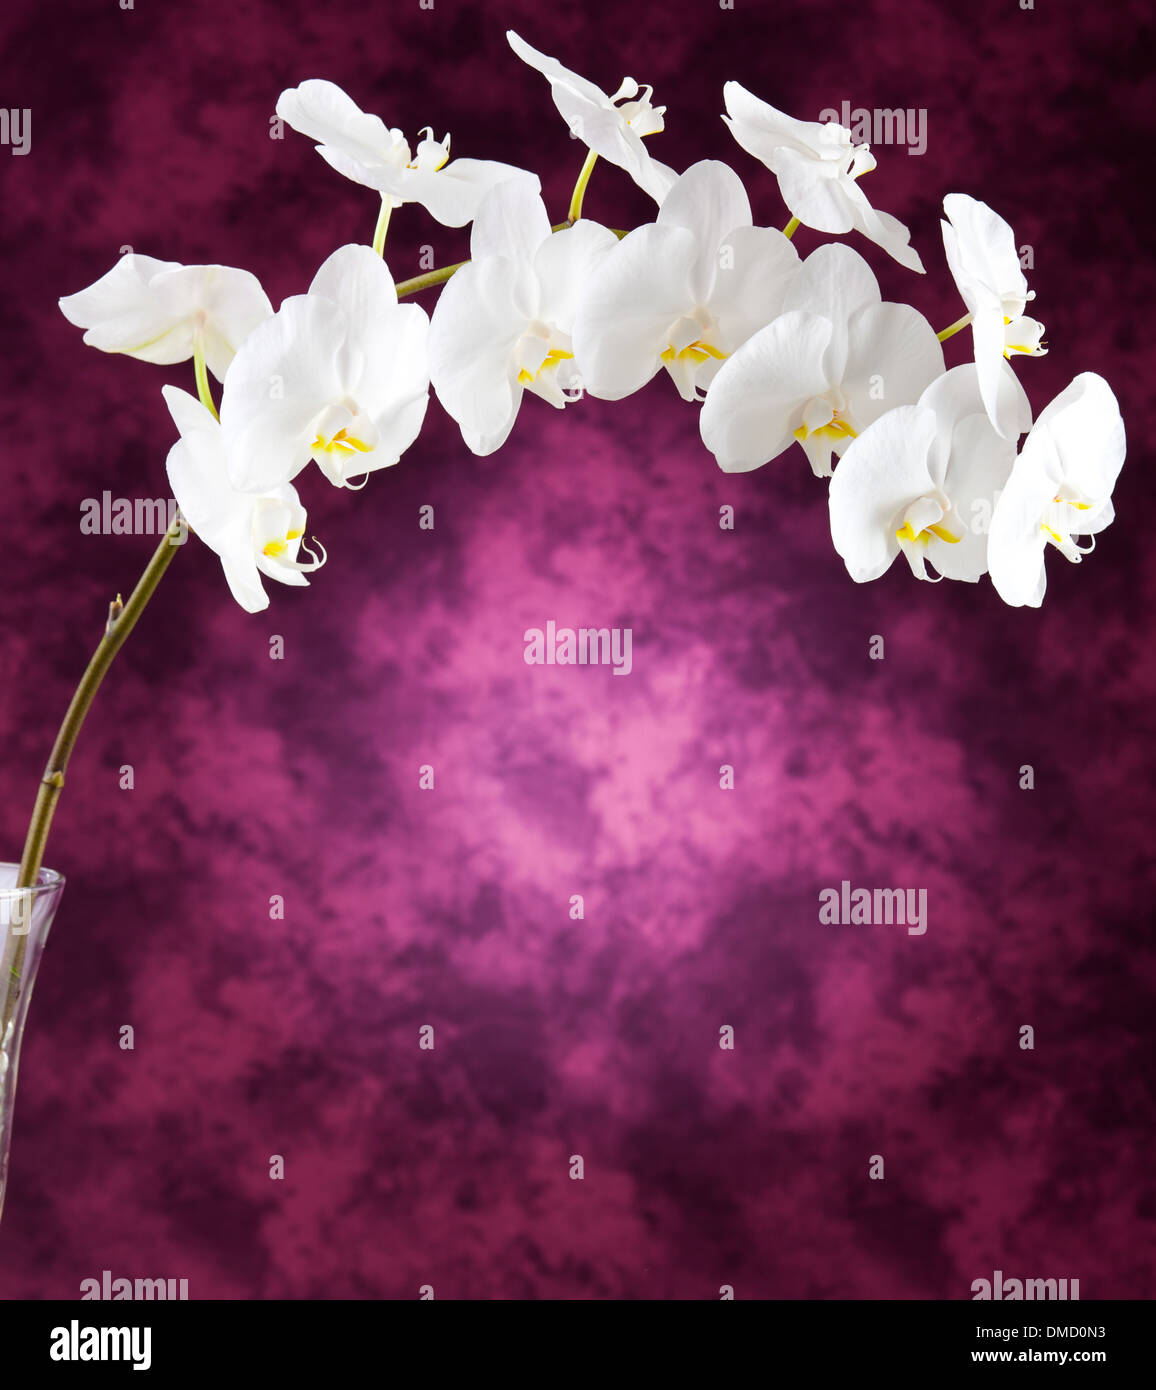 White orchid flowers on purple background Stock Photo